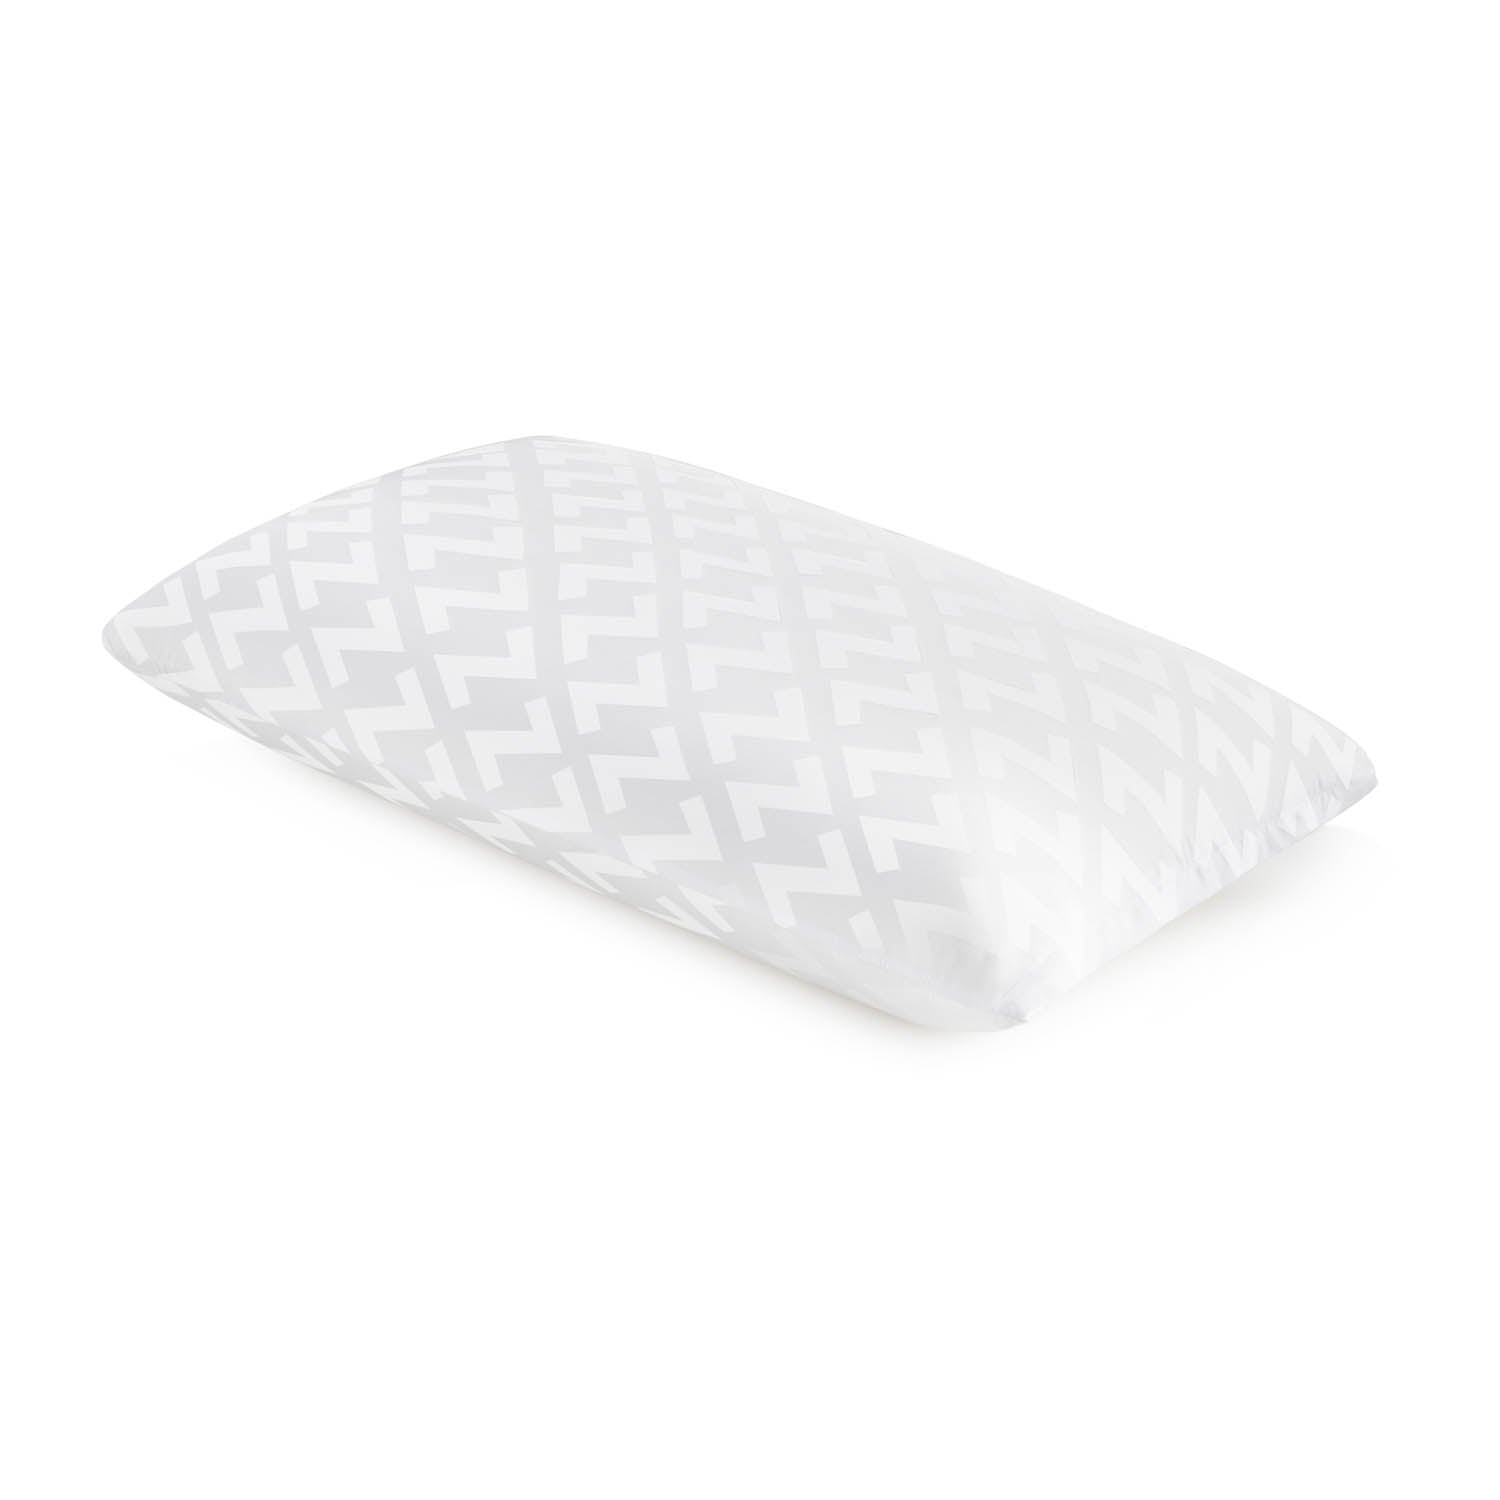 Malouf Tencel® Pillow Replacement Cover